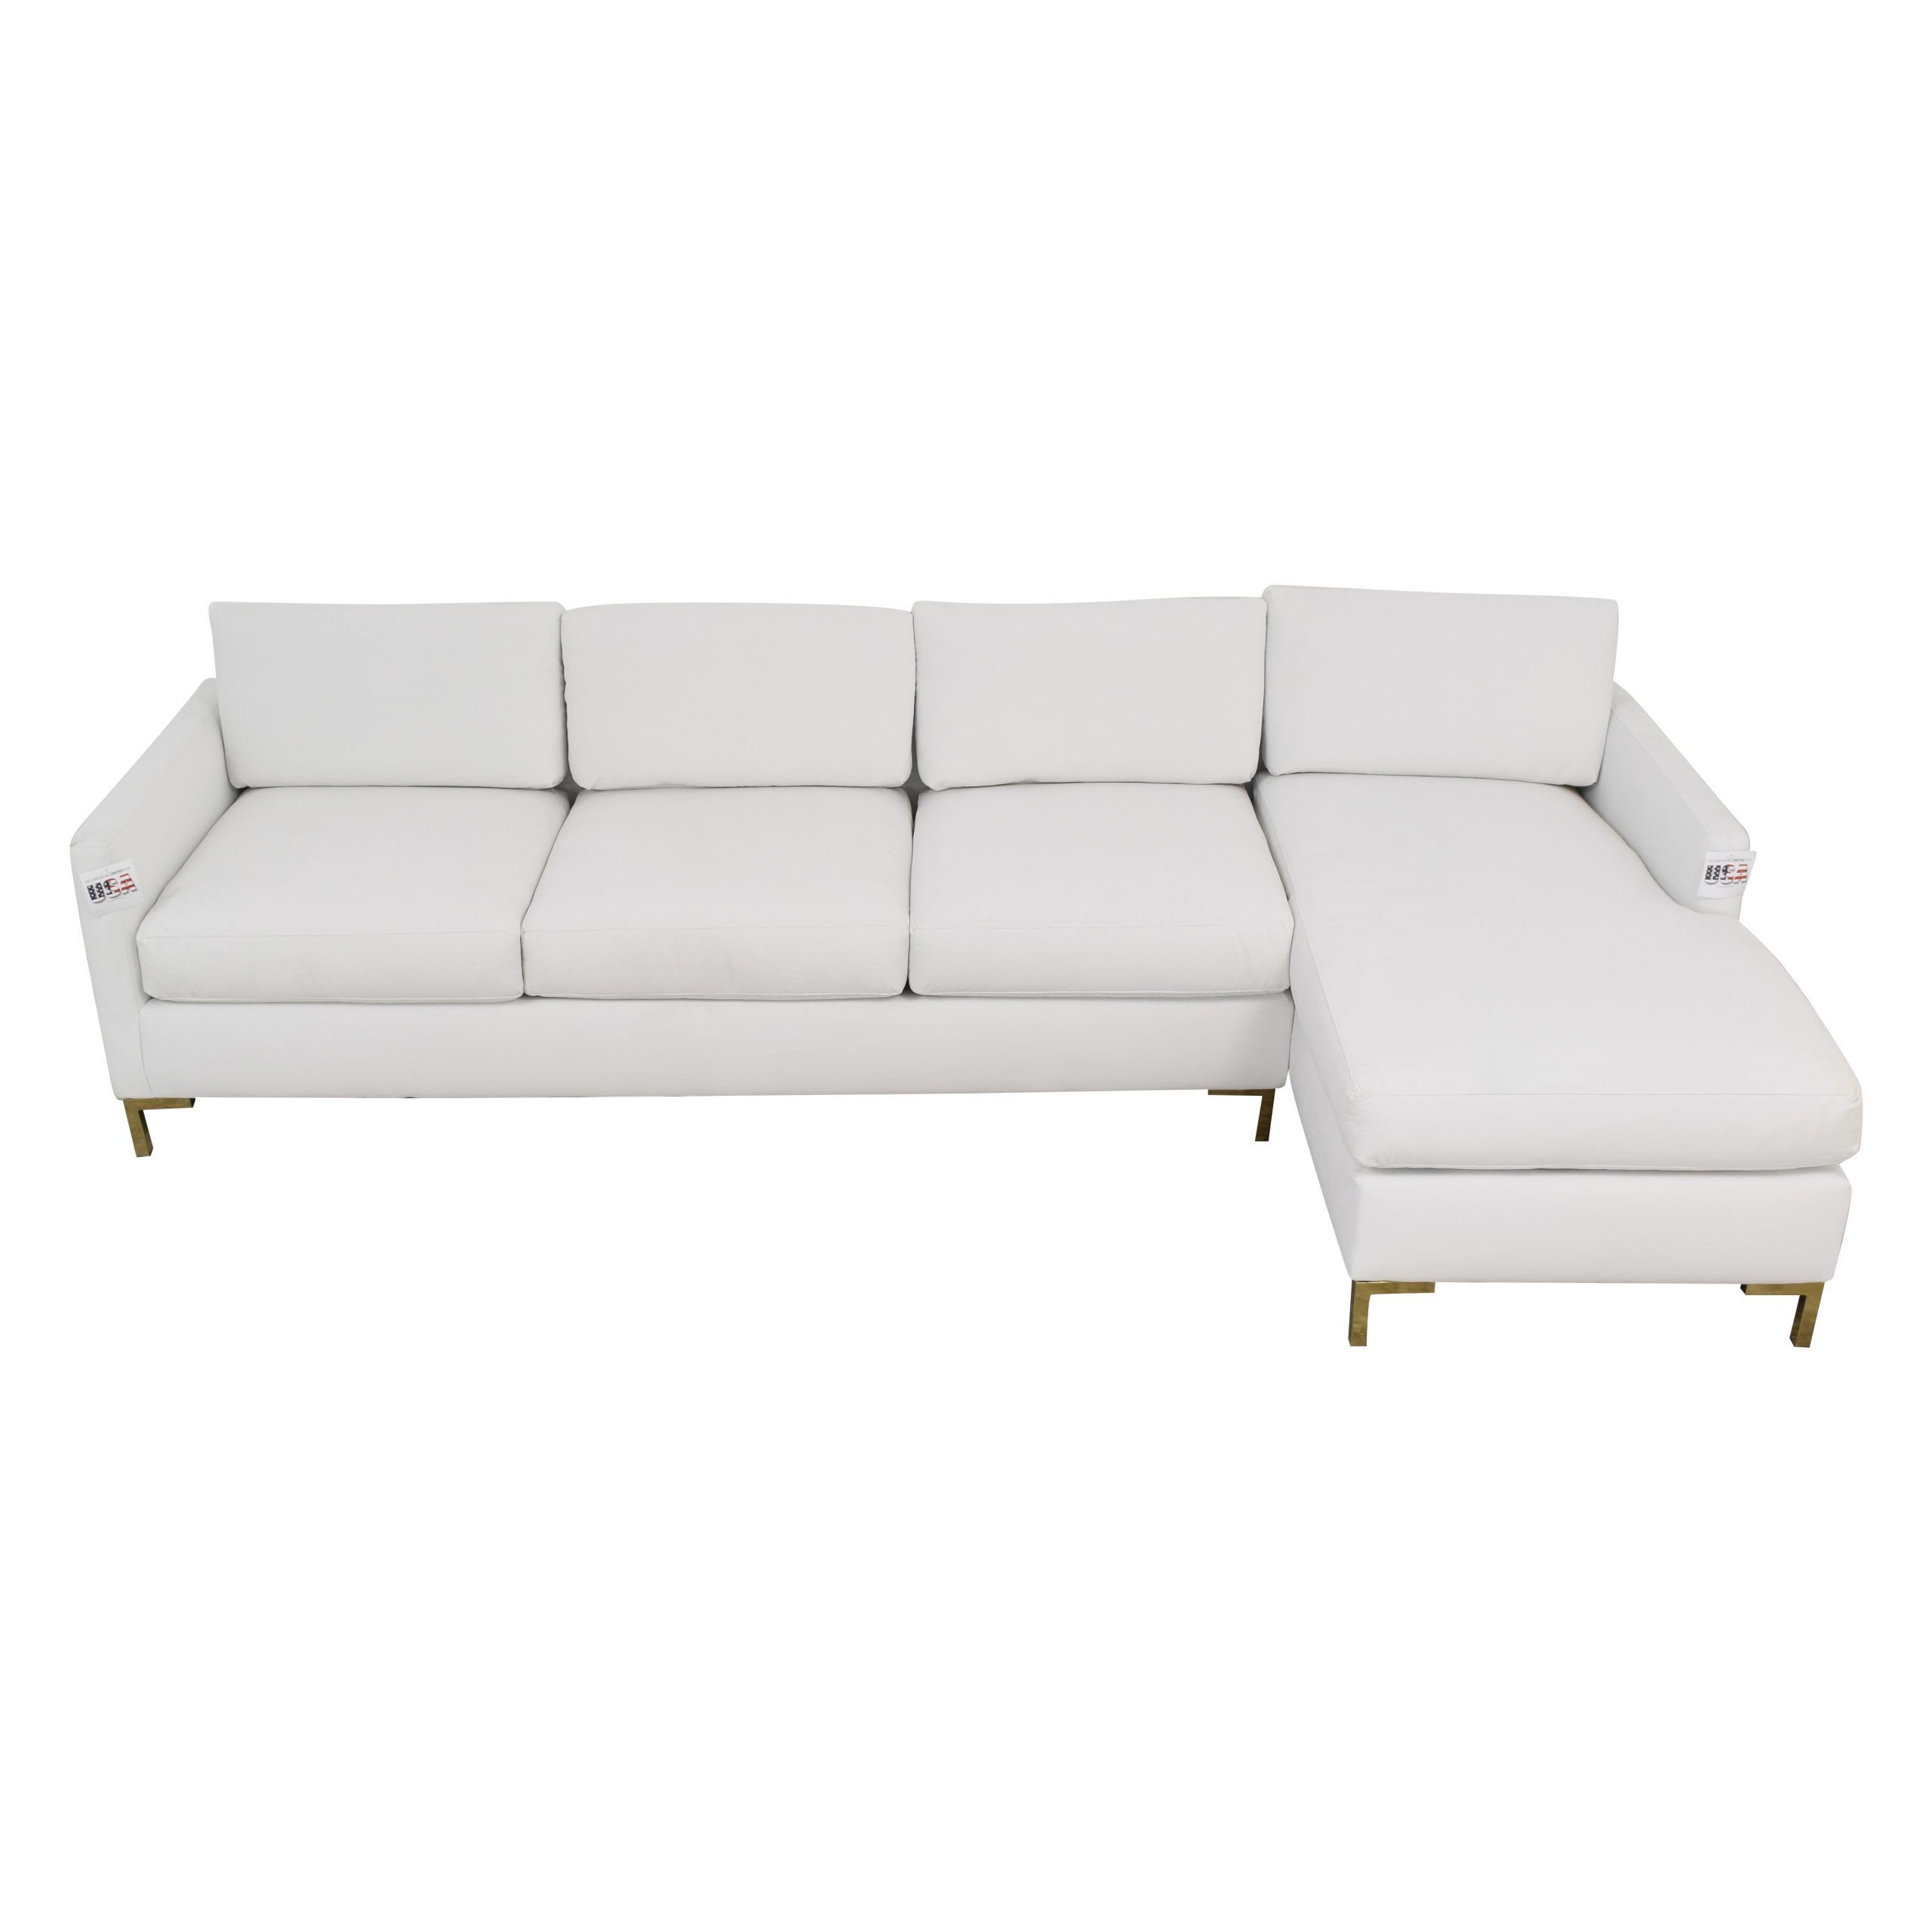 37% Off – The Inside The Inside Modern Sectional Right Throughout Kiefer Right Facing Sectional Sofas (View 3 of 15)